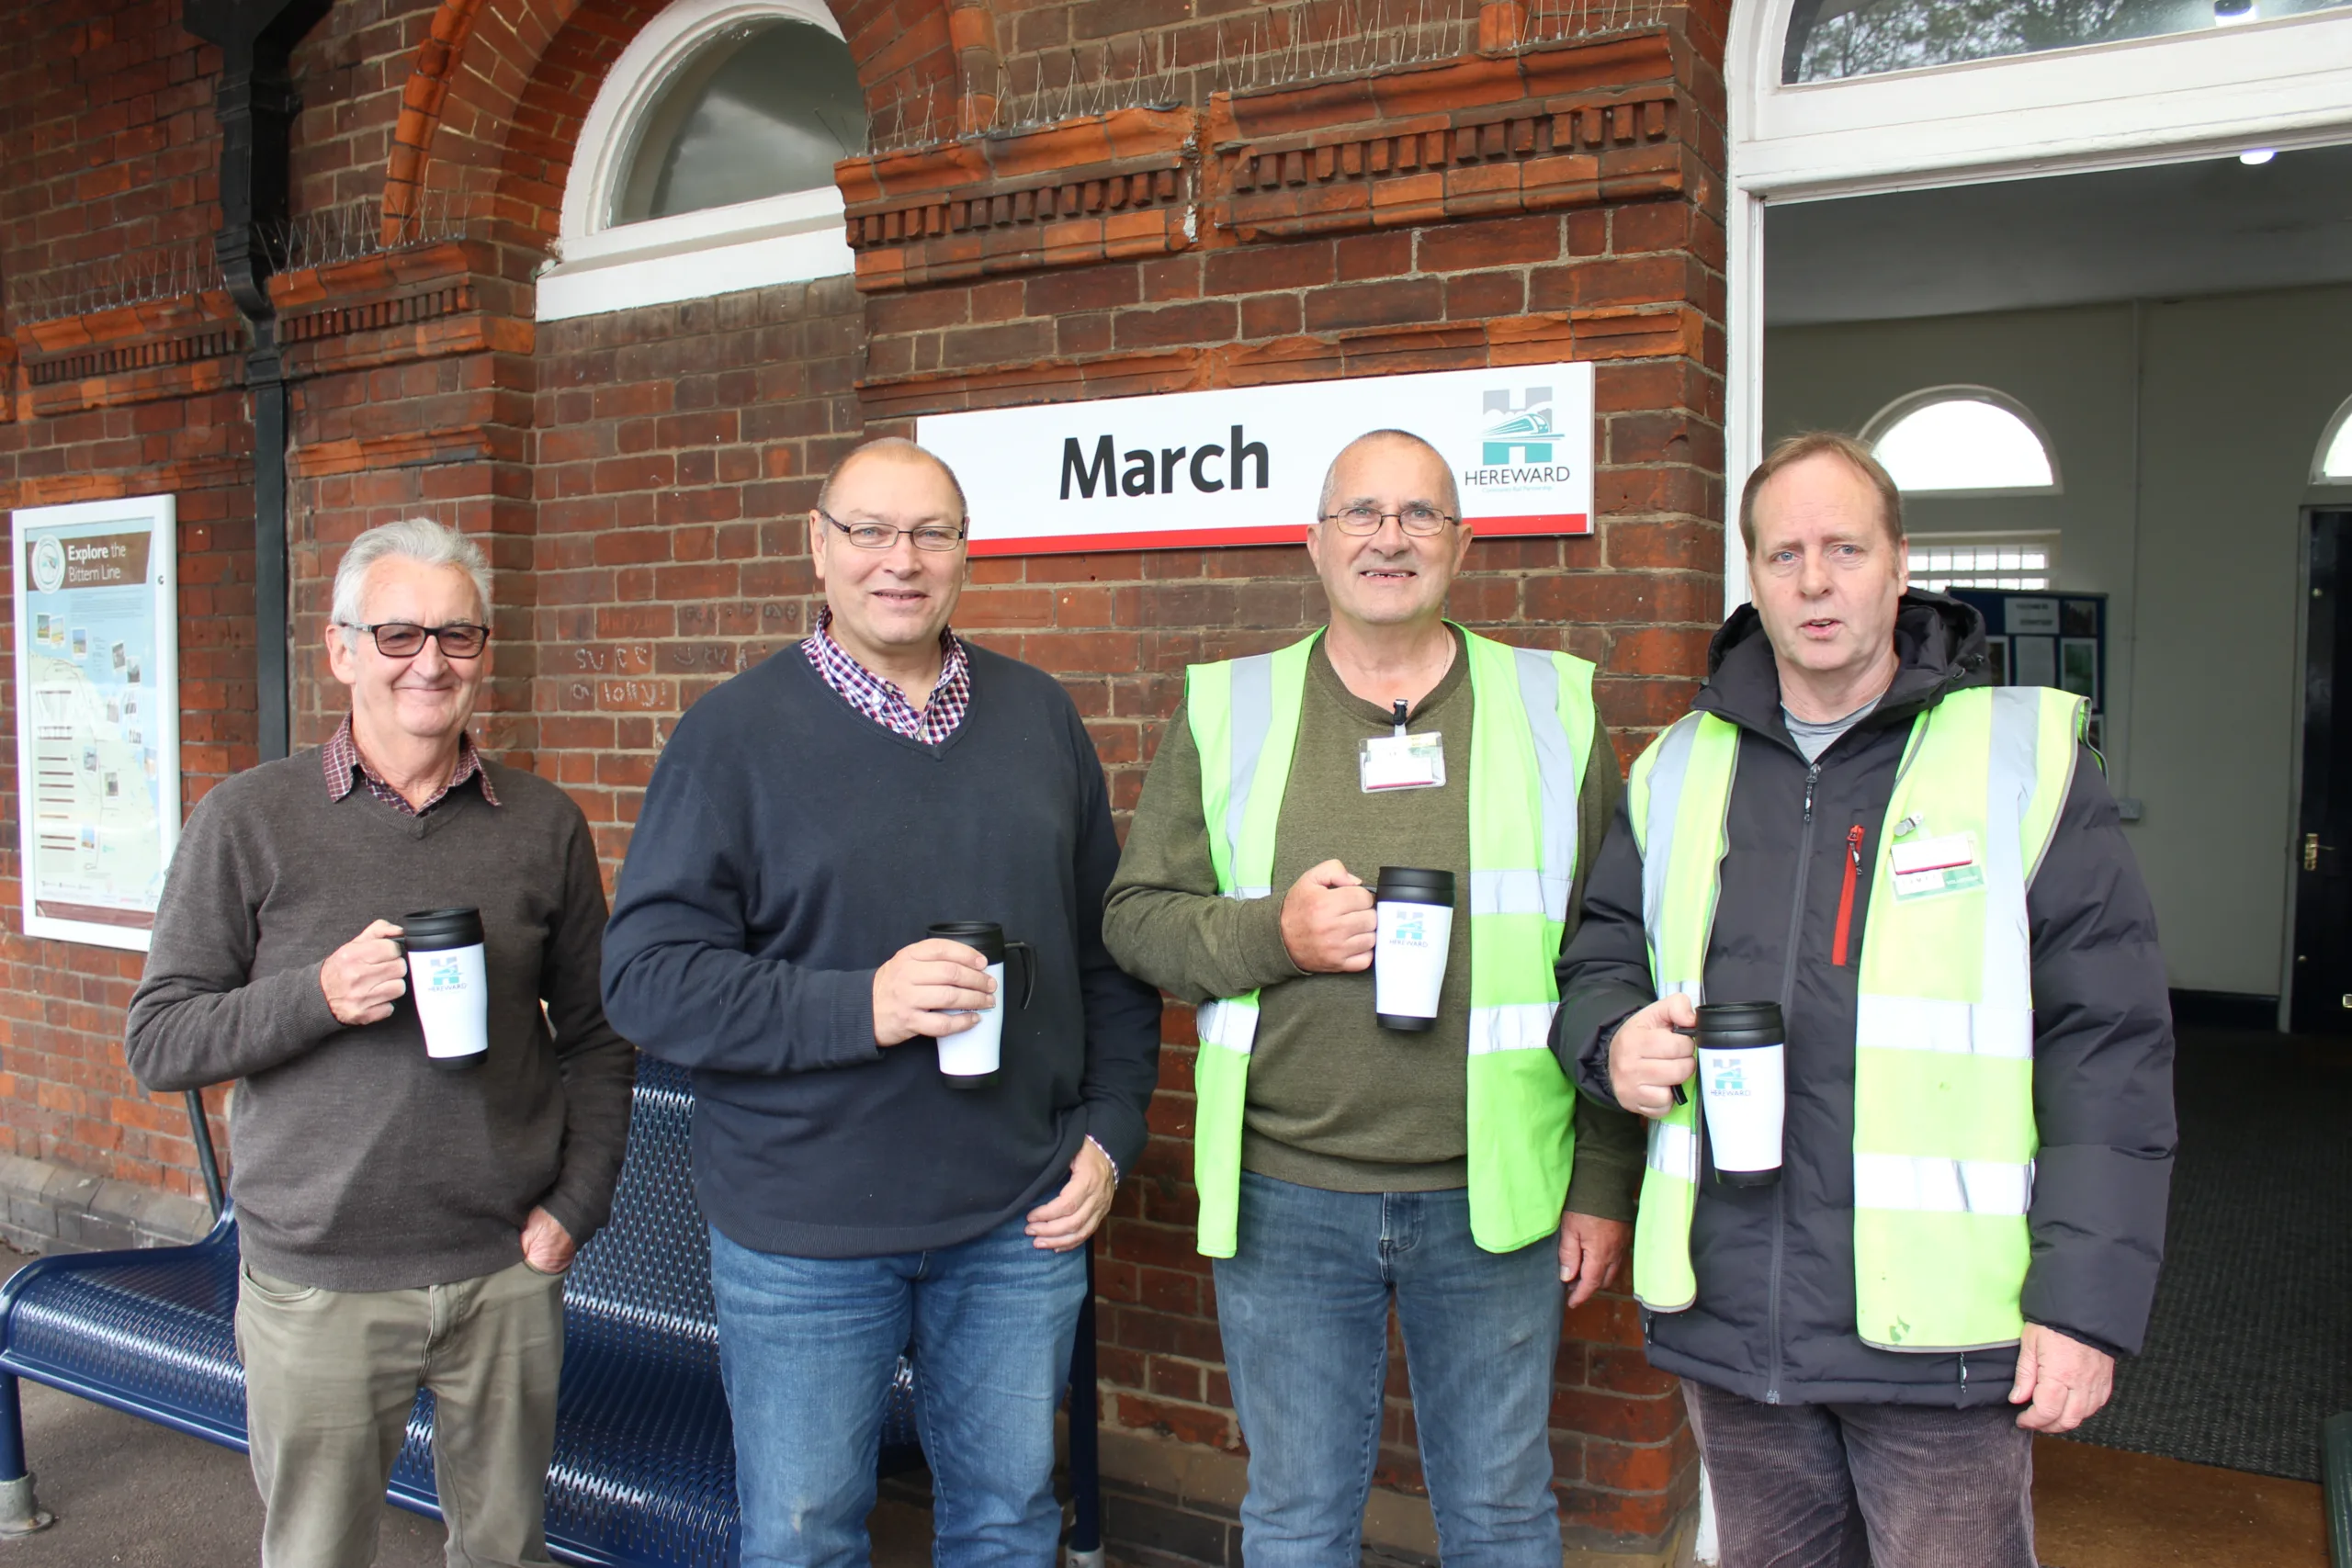 Friends of March Railway Station. From left: Dave Storey, Cllr Gary Christy, Max Mobius, Adrian Sutterby.